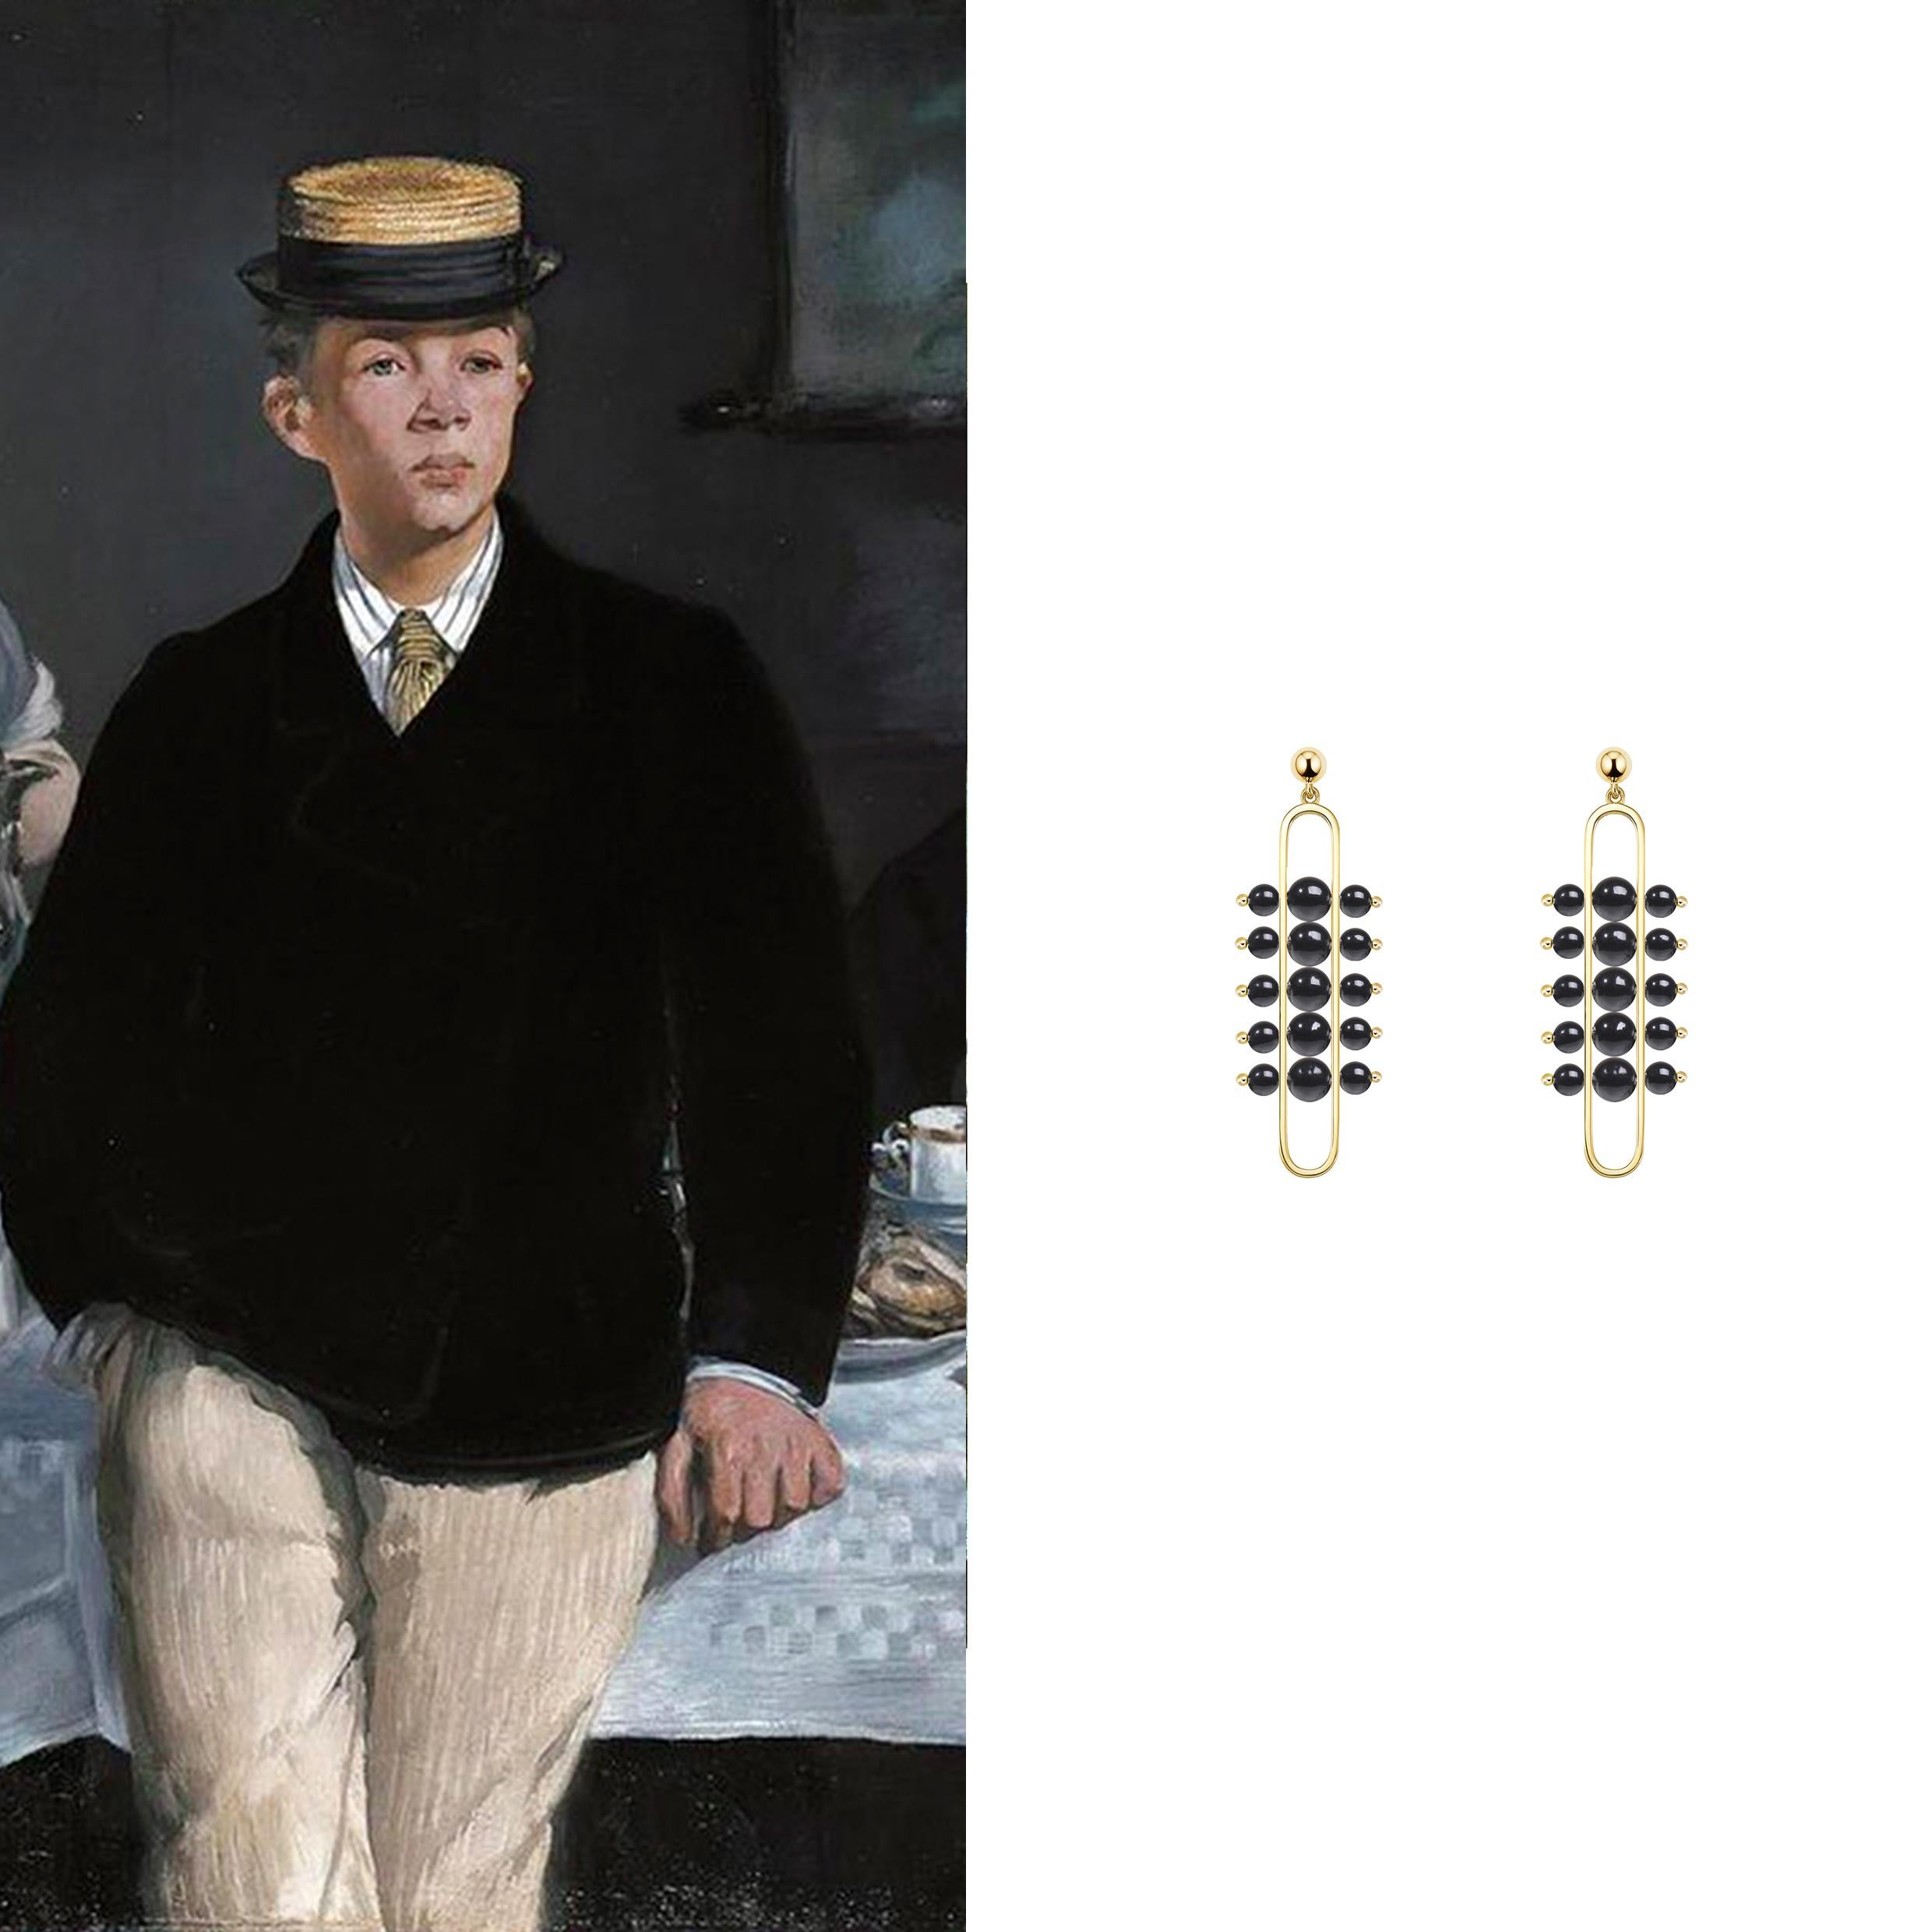 This beautifully crafted pair of earrings features hand selected Black Onyx beads set in 18k Yellow Gold. The gems are chosen for their quality and colour to best echo those hues in Édouard Manet's painting ‘Le Déjeuner dans l'atelier (Luncheon in